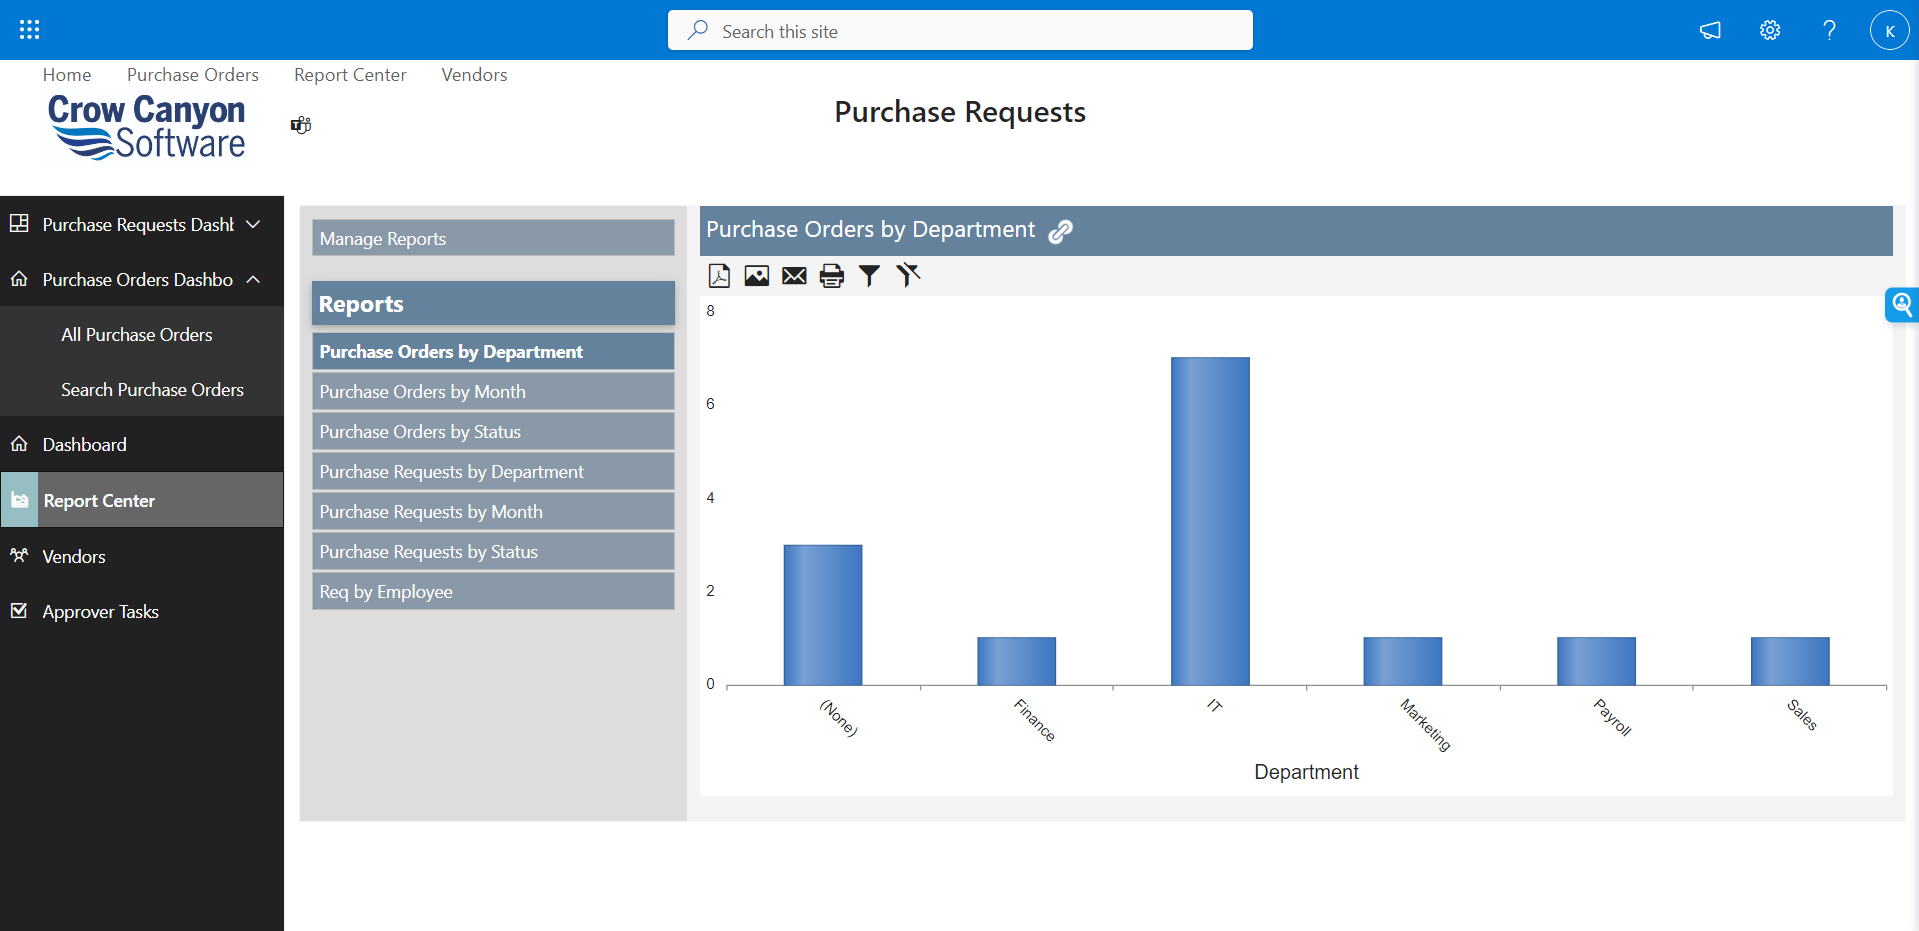 Reporting: Purchase Orders by Department